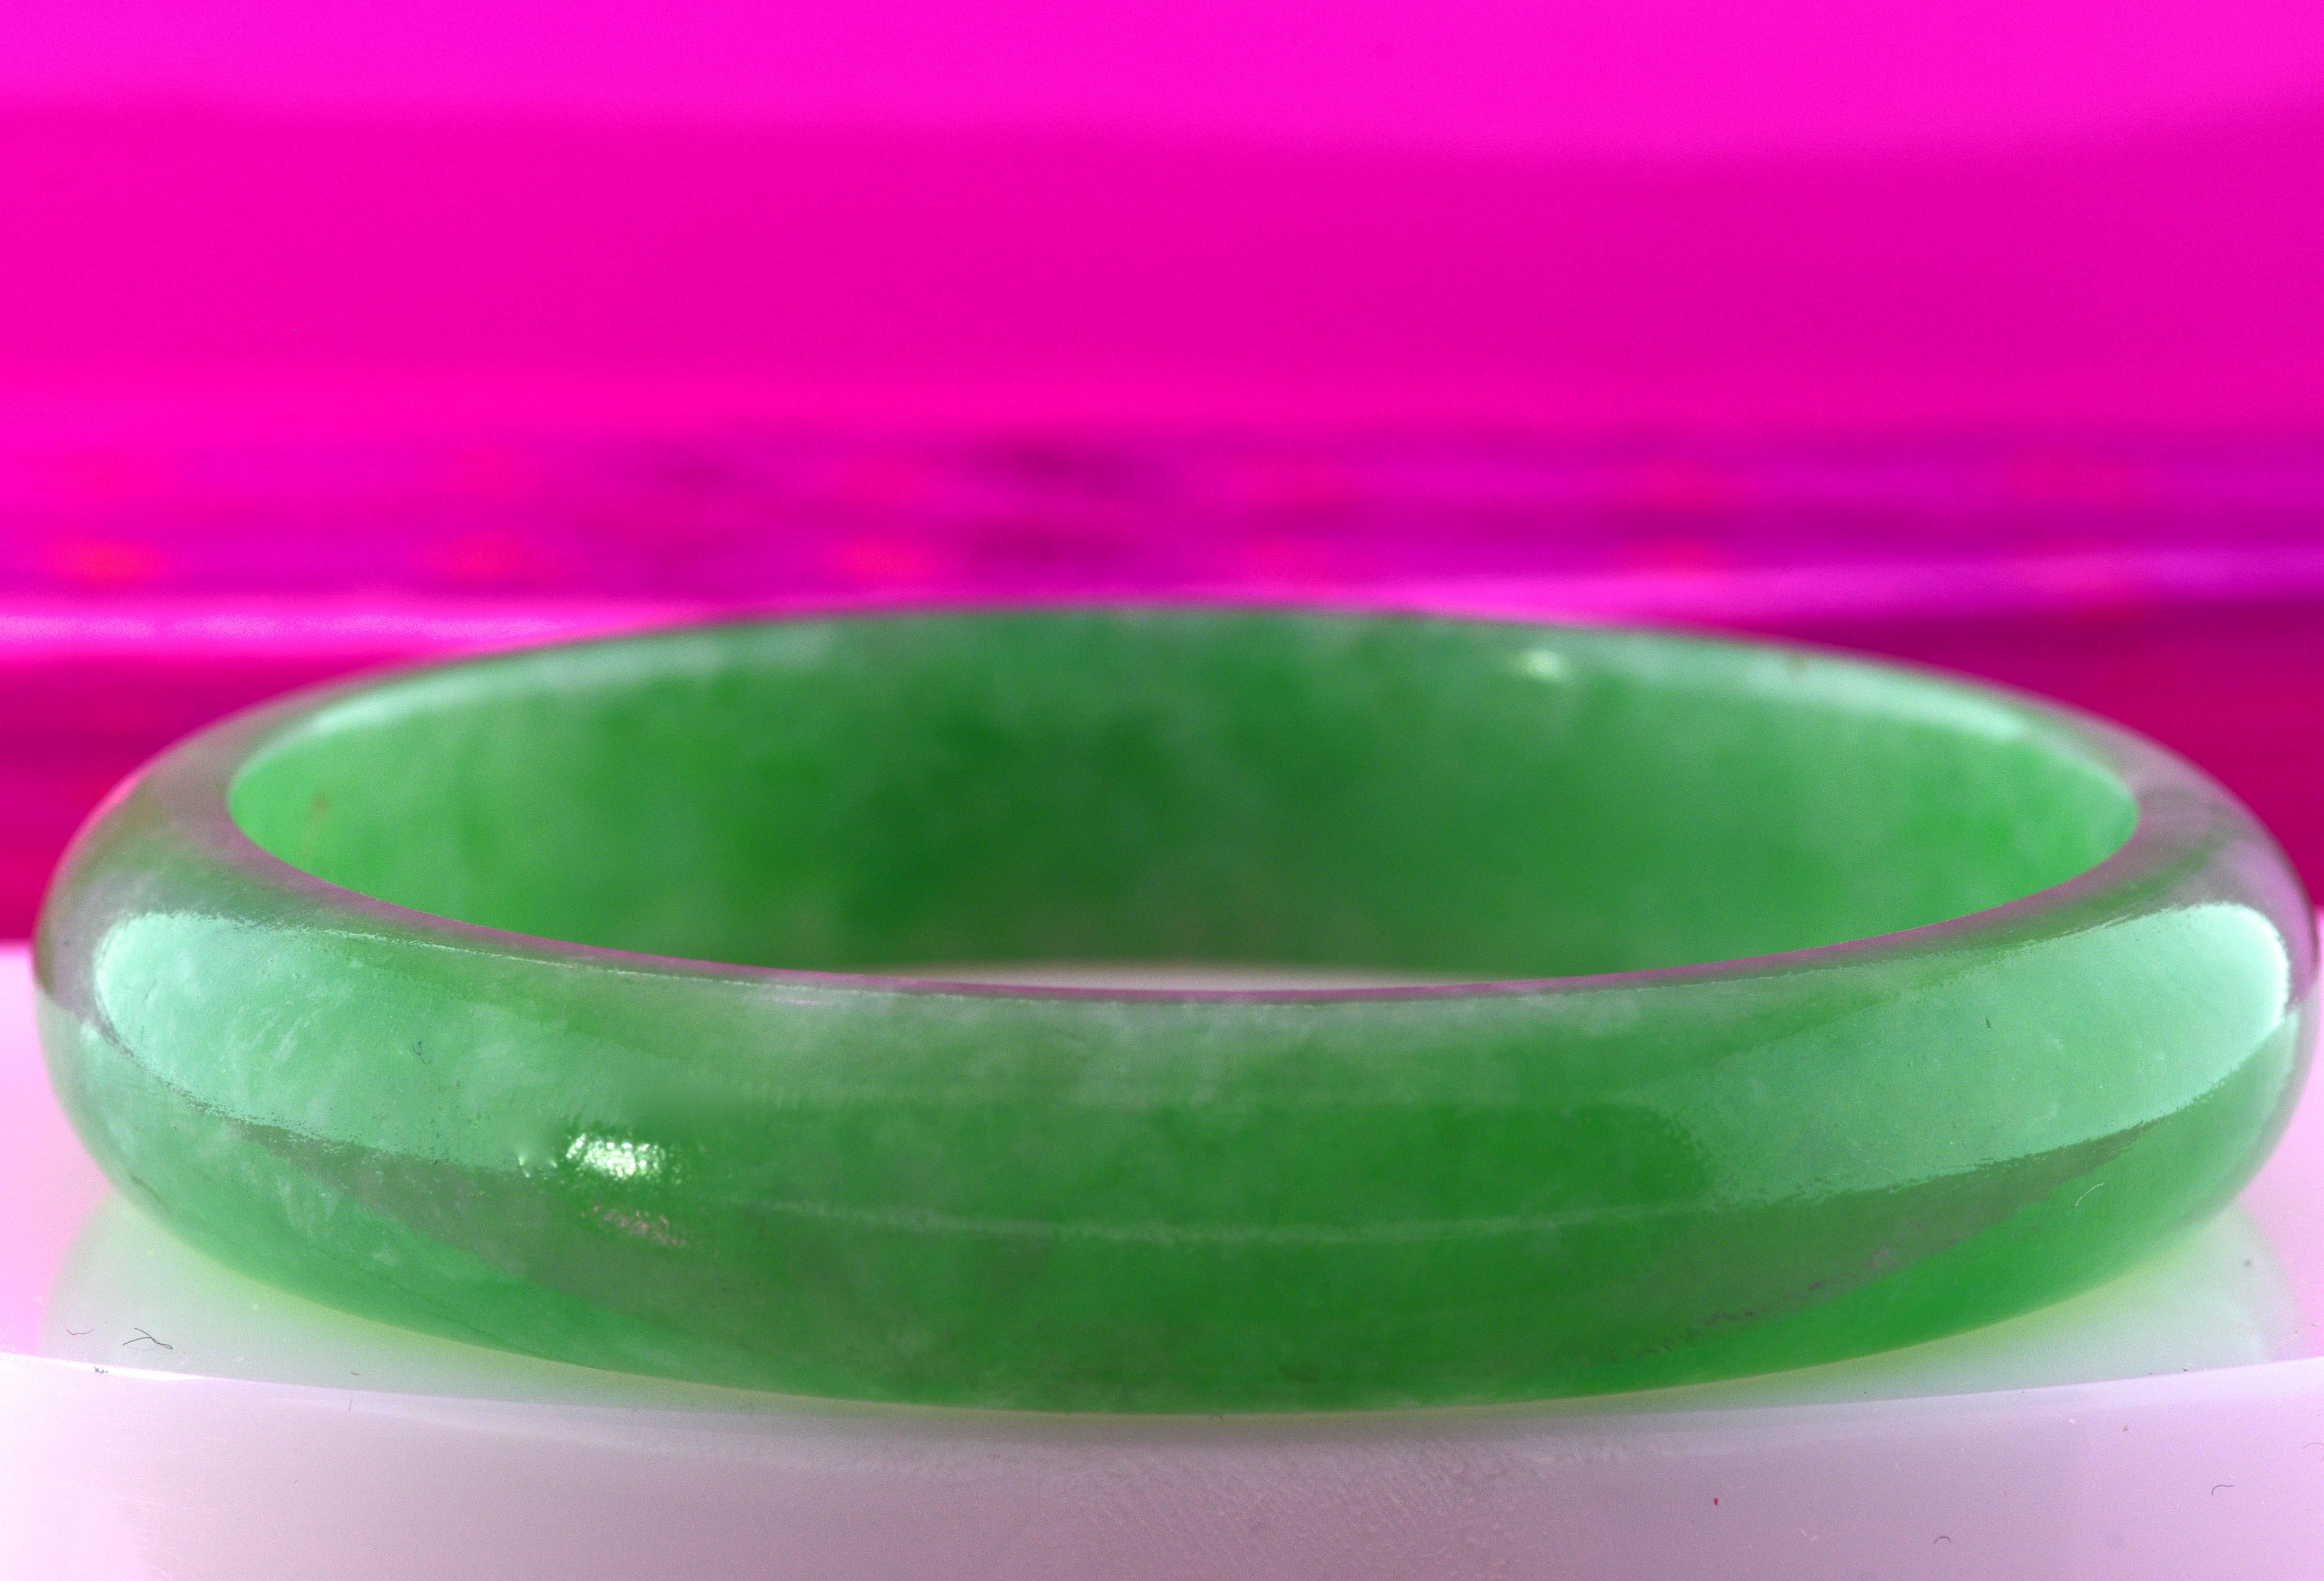 Green jadeite jade - bright and lively carved in to create a bangle bracelet.  This smooth jade piece slips over one's wrist and is a medium size and will fit most wrists.  The jade is 5 mm thick, slightly transparent and slightly mottled from